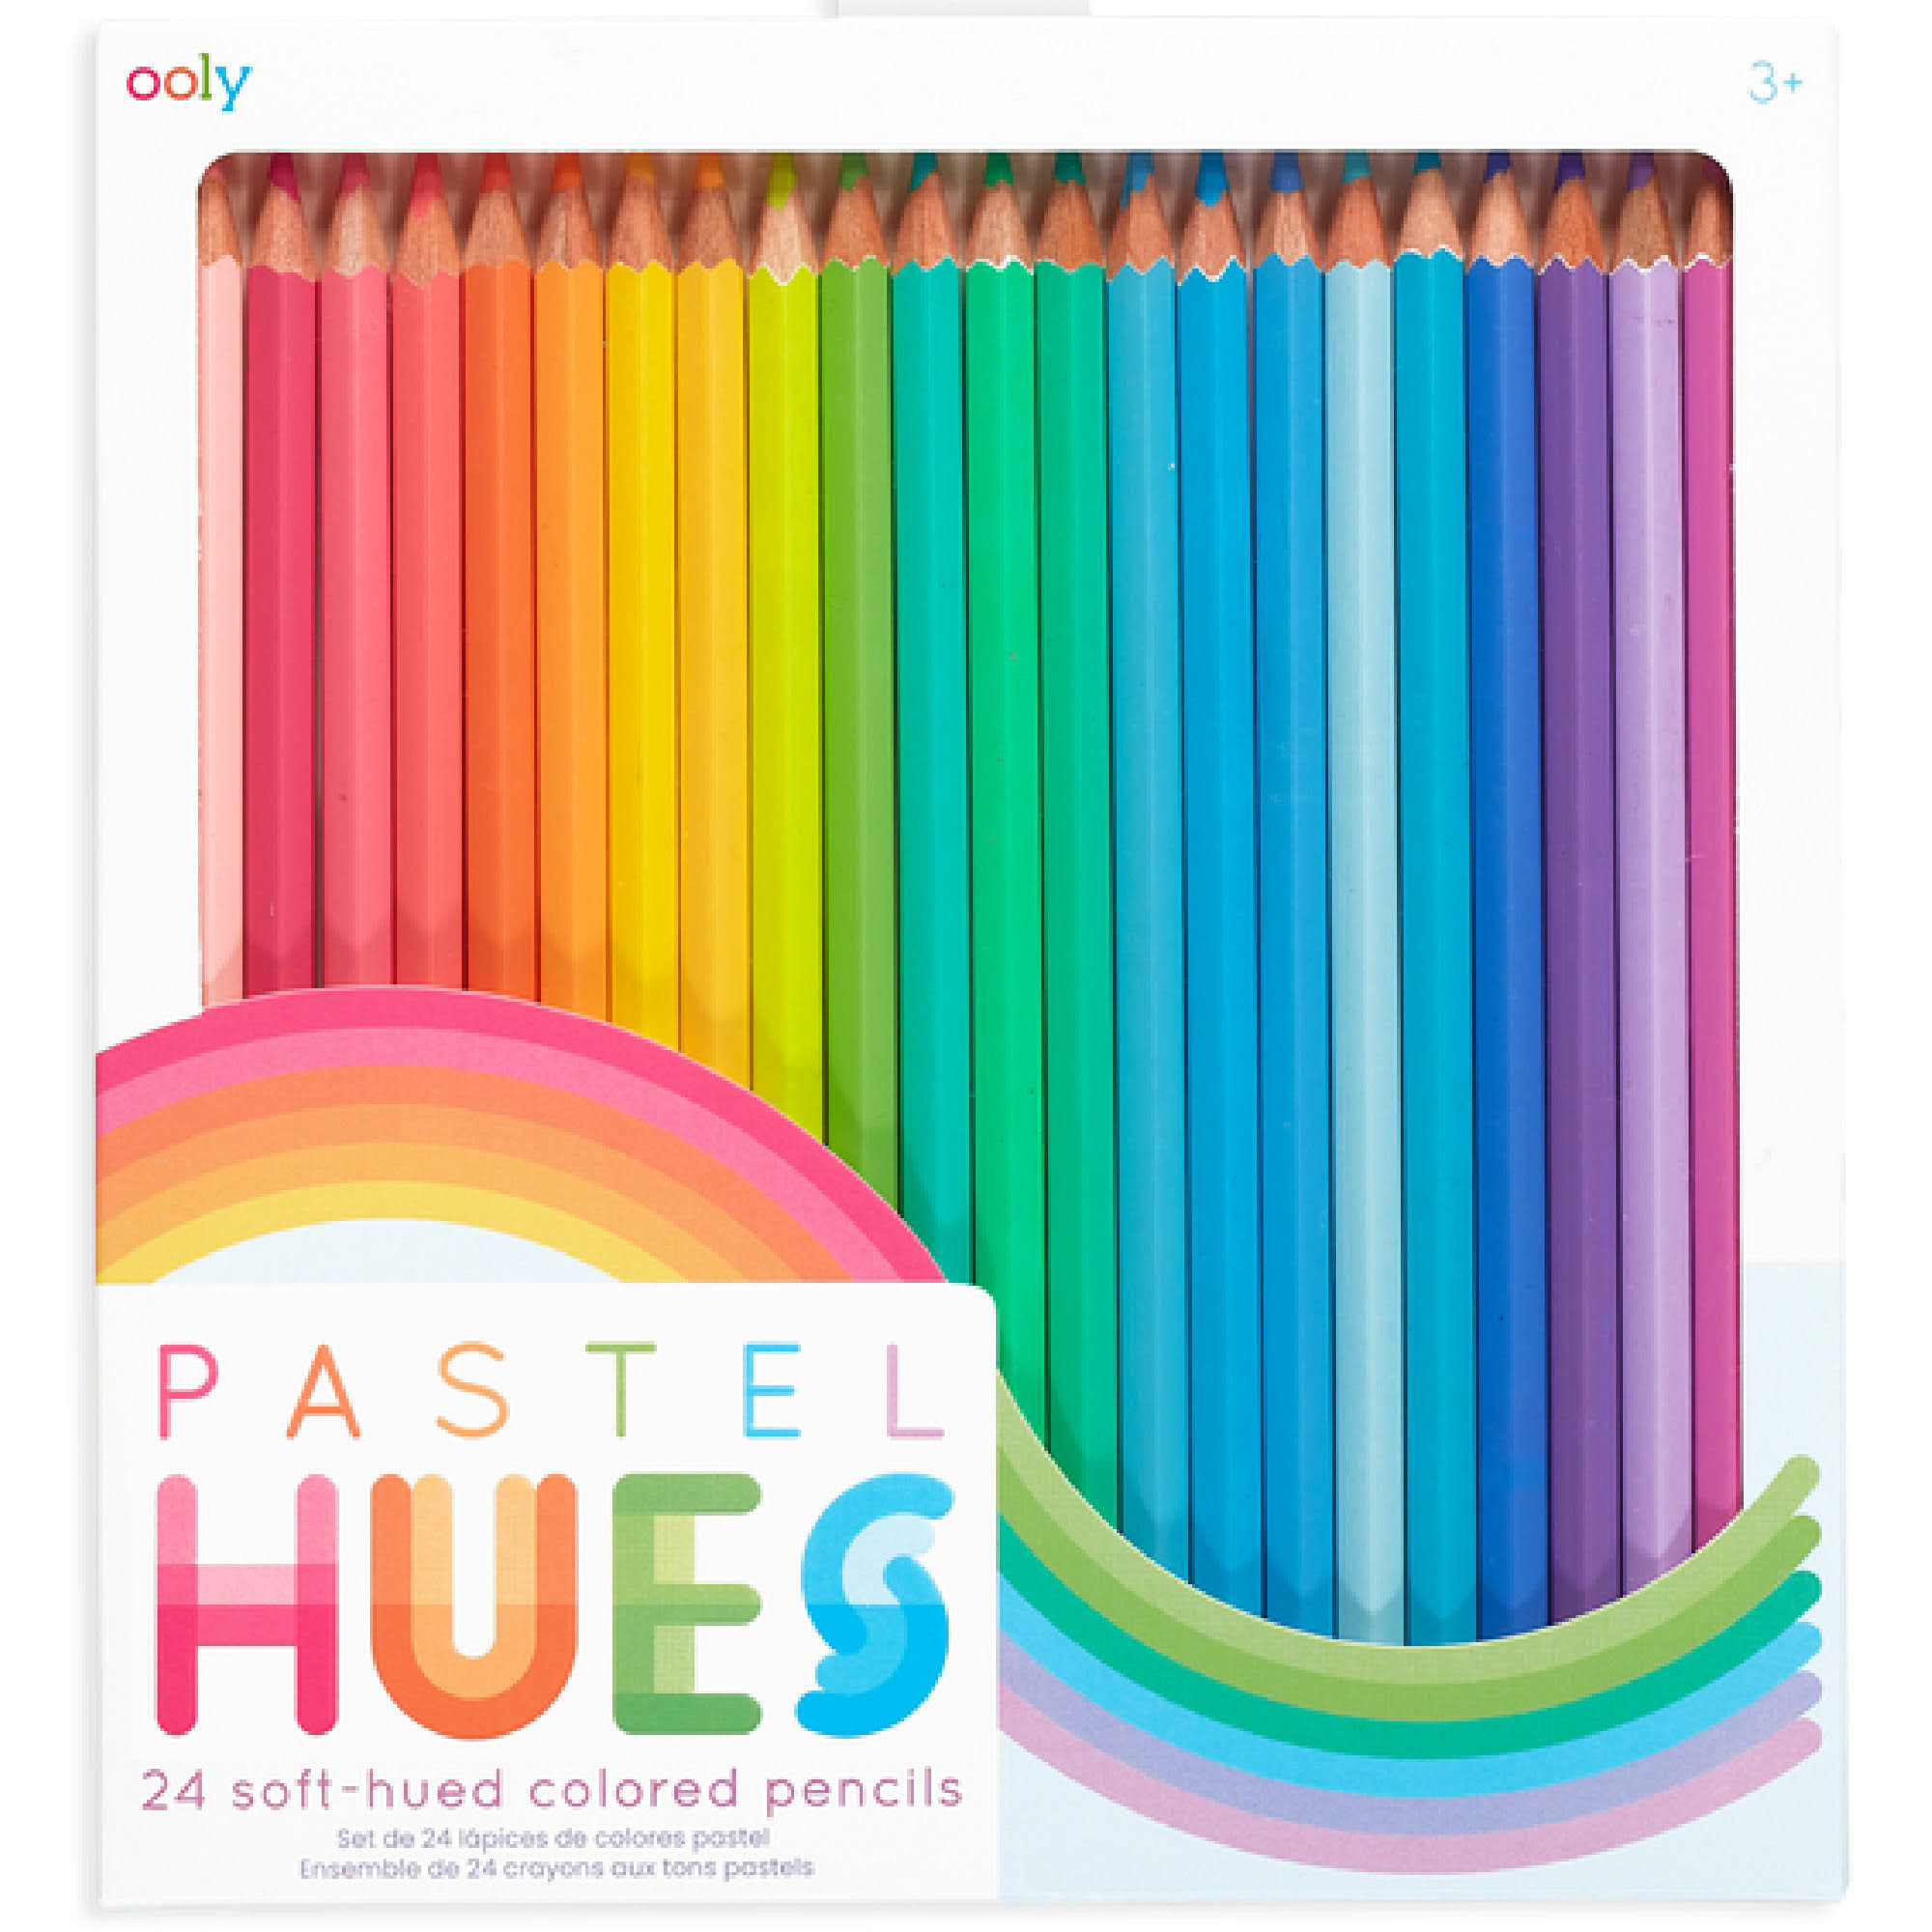 Ooly Pastel Hues Colored Pencils - Set of 24